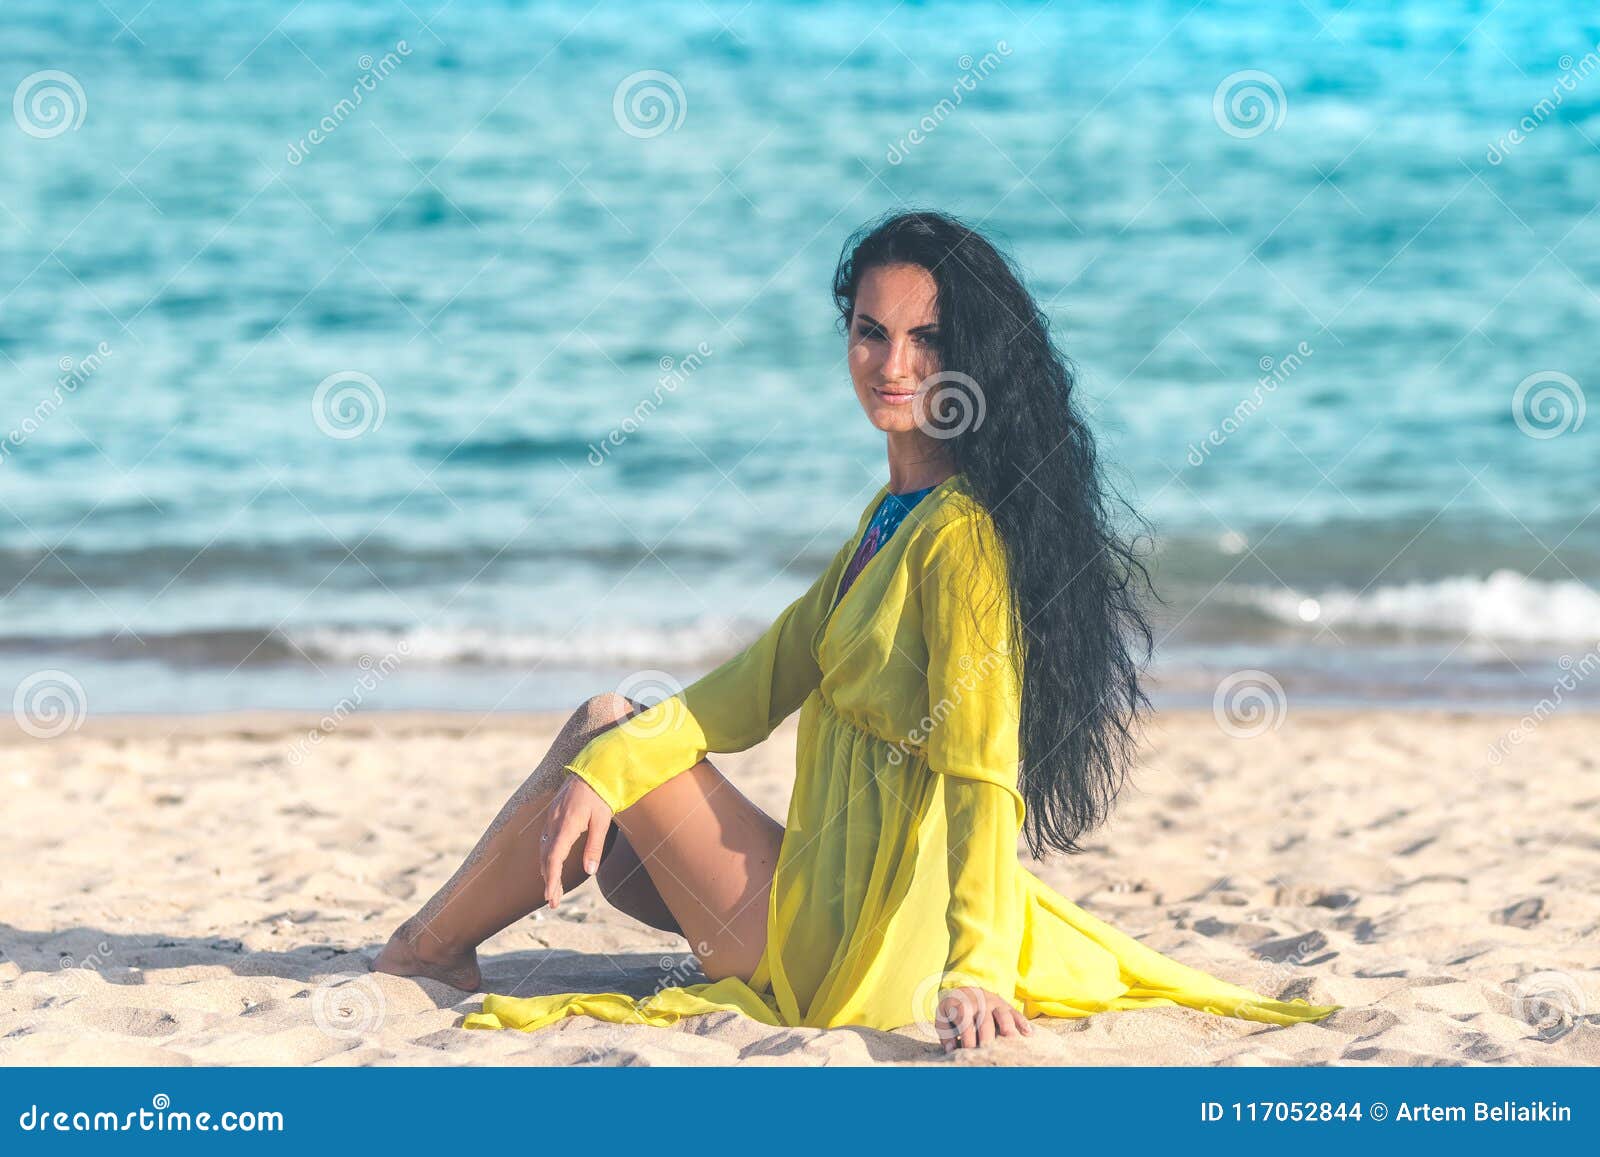 Young Woman Posing on the Tropical Beach of Bali Island, Indonesia photo pic